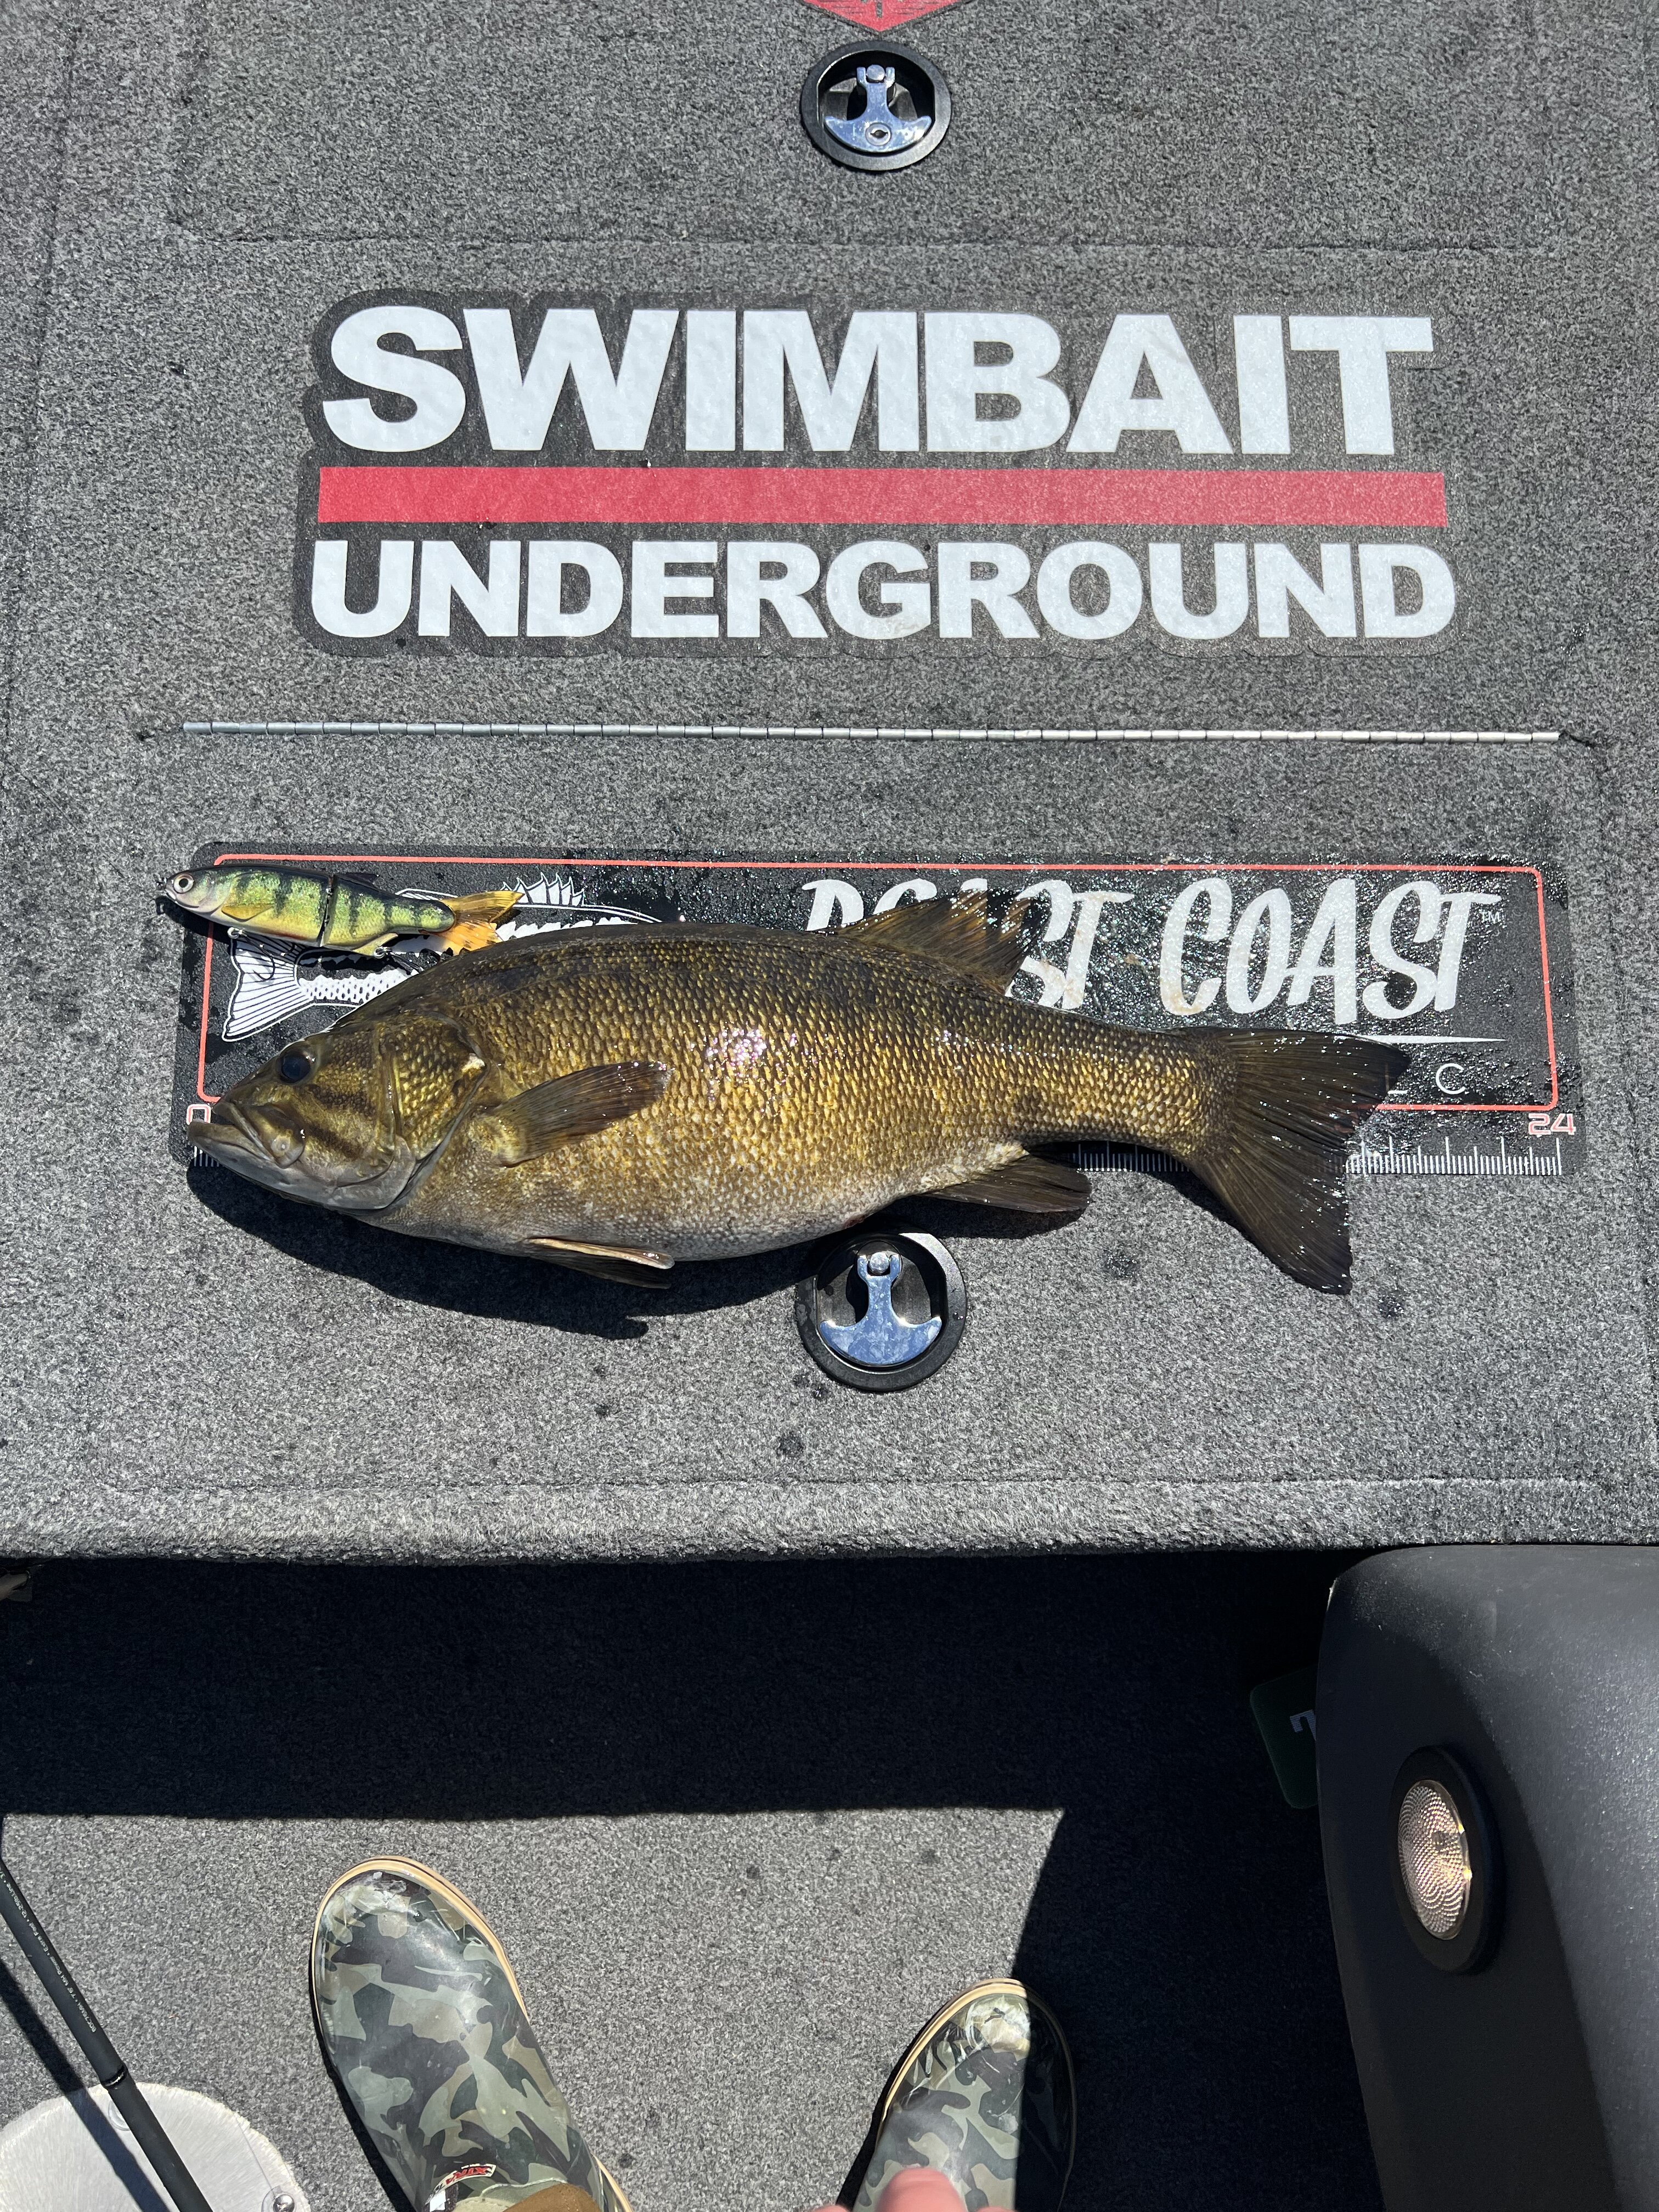 I'm looking for a good swimbait reel what would you recomend? - The  Underground - Swimbait Underground